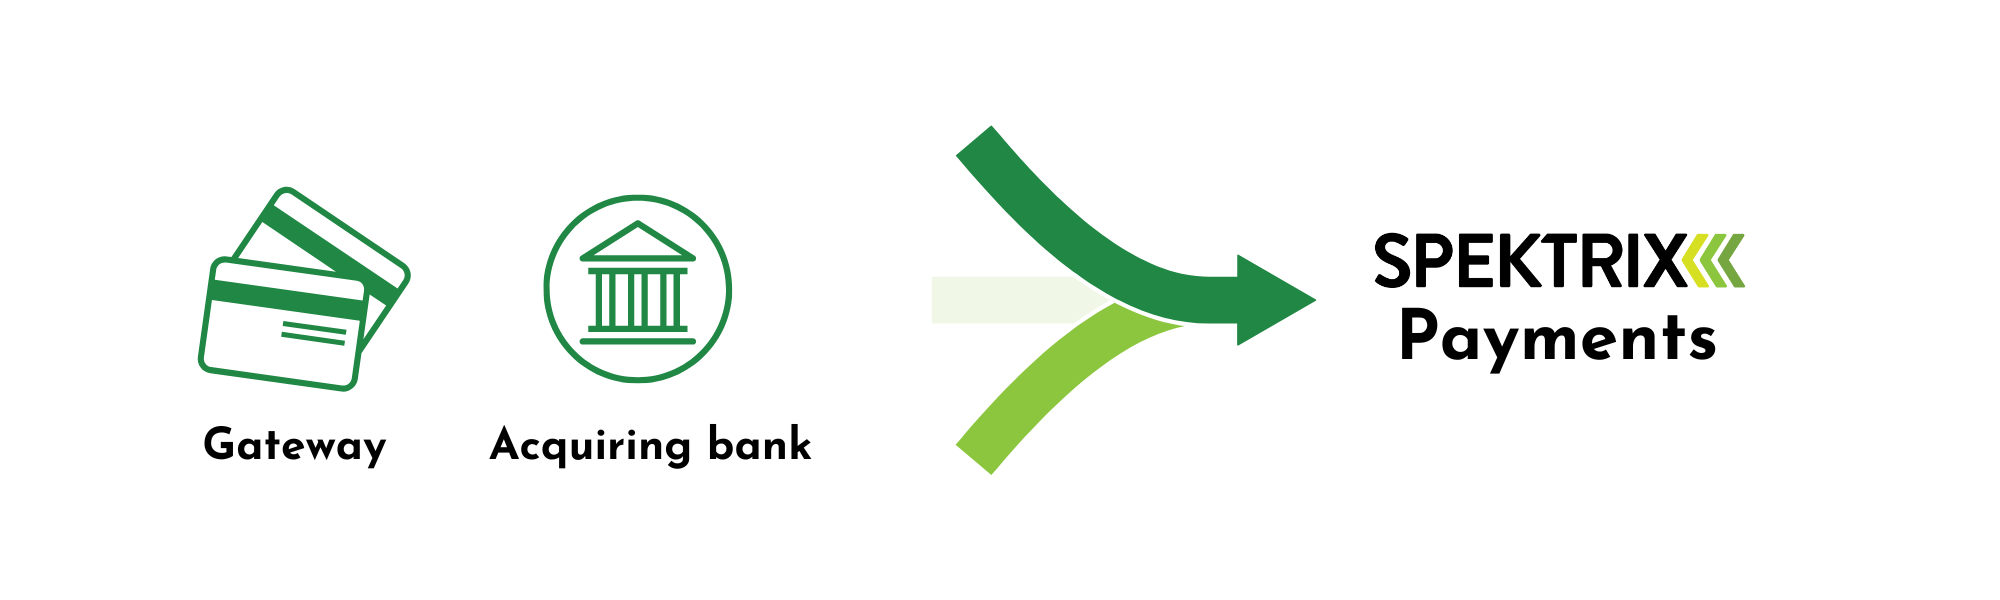 diagram showing a gateway and an acquiring bank being combined into Spektrix Payments